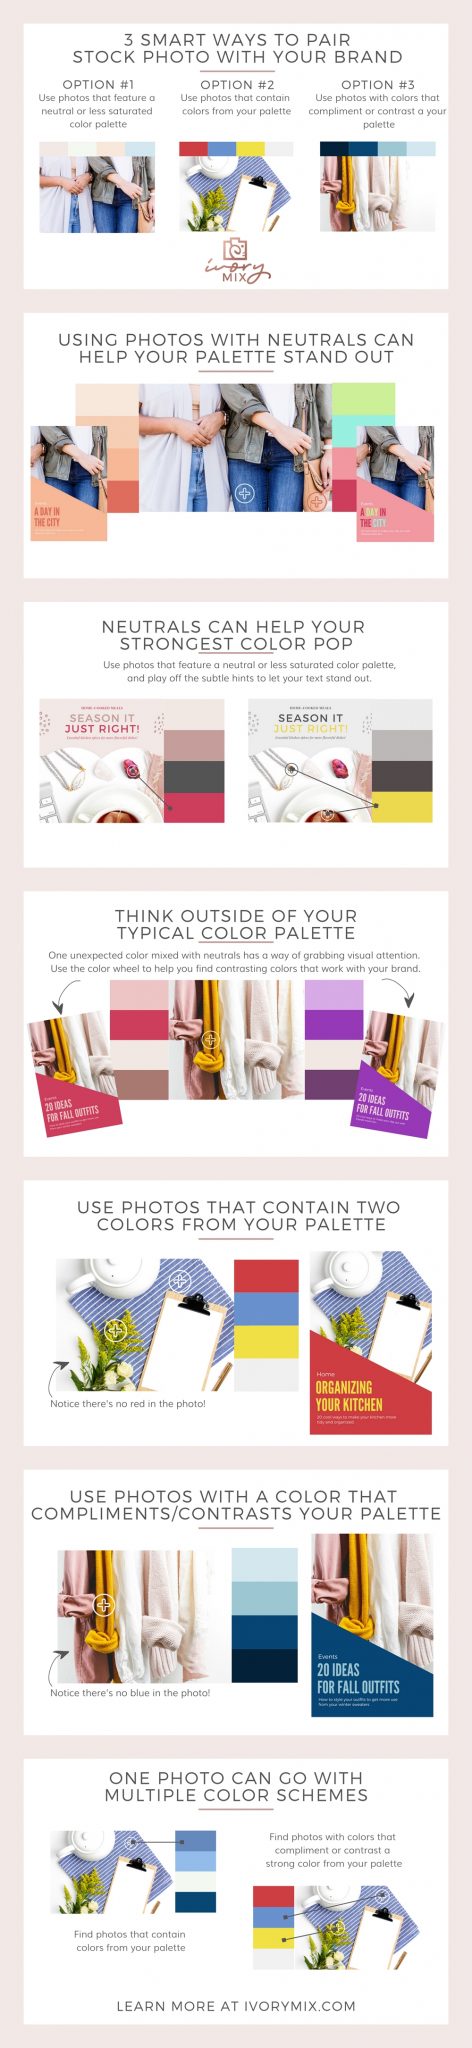 Smartest ways to use stock photos for your brand || Grab the tools and resources for pairing photos with your brand and different types of color palettes. These tips are unexpected and will totally open up your branding world!